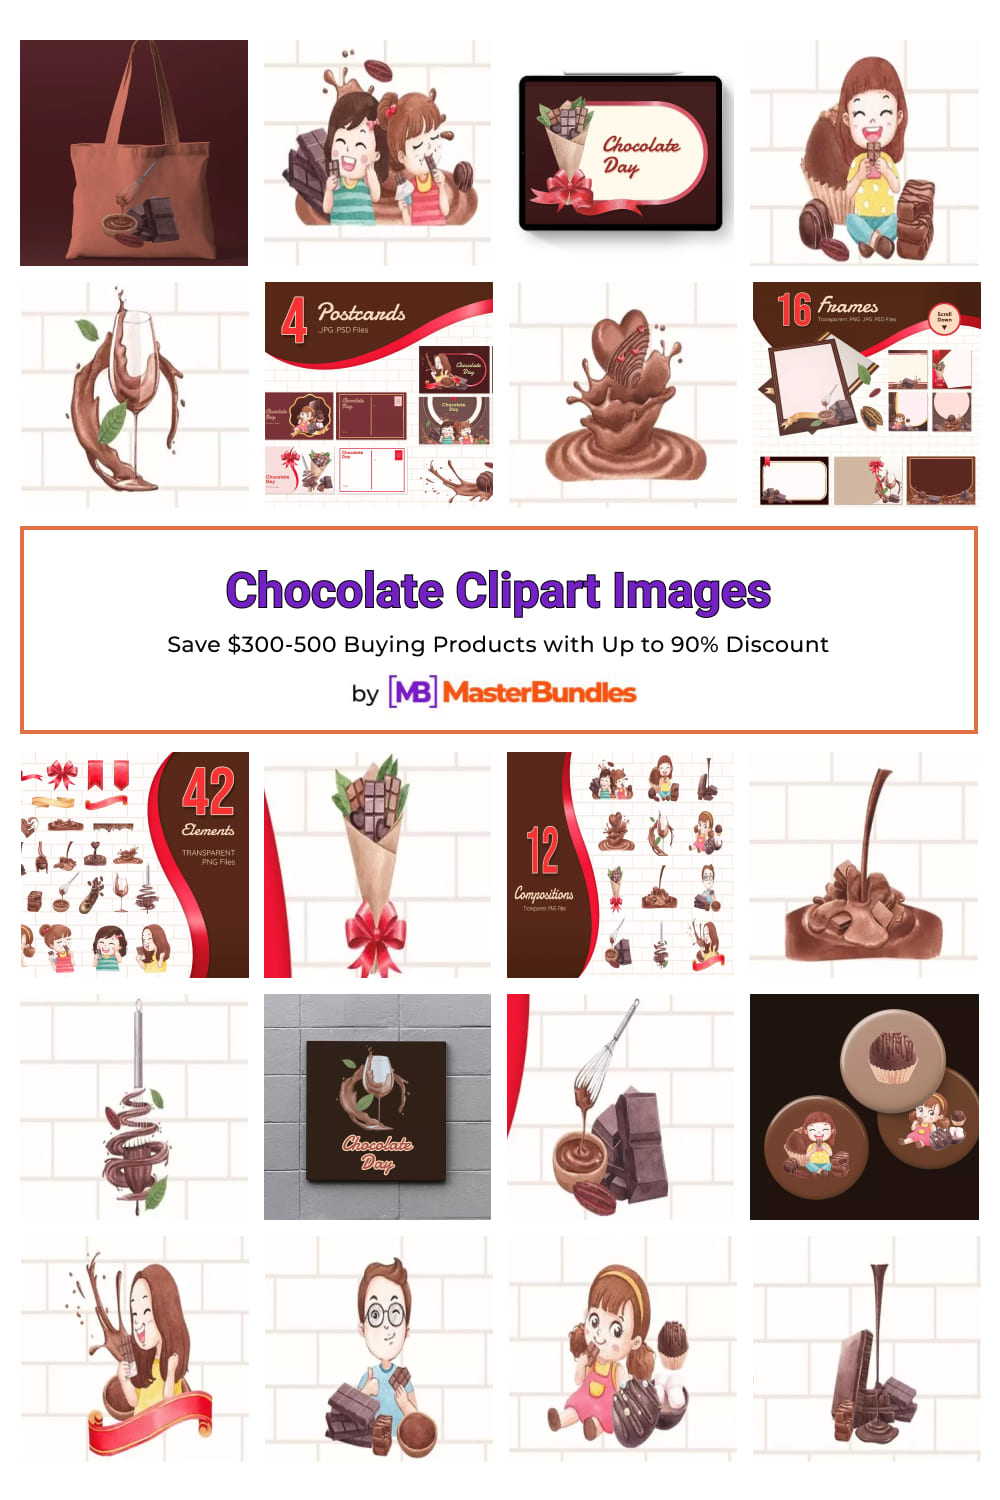 Chocolate Clipart Images Pinterest image.